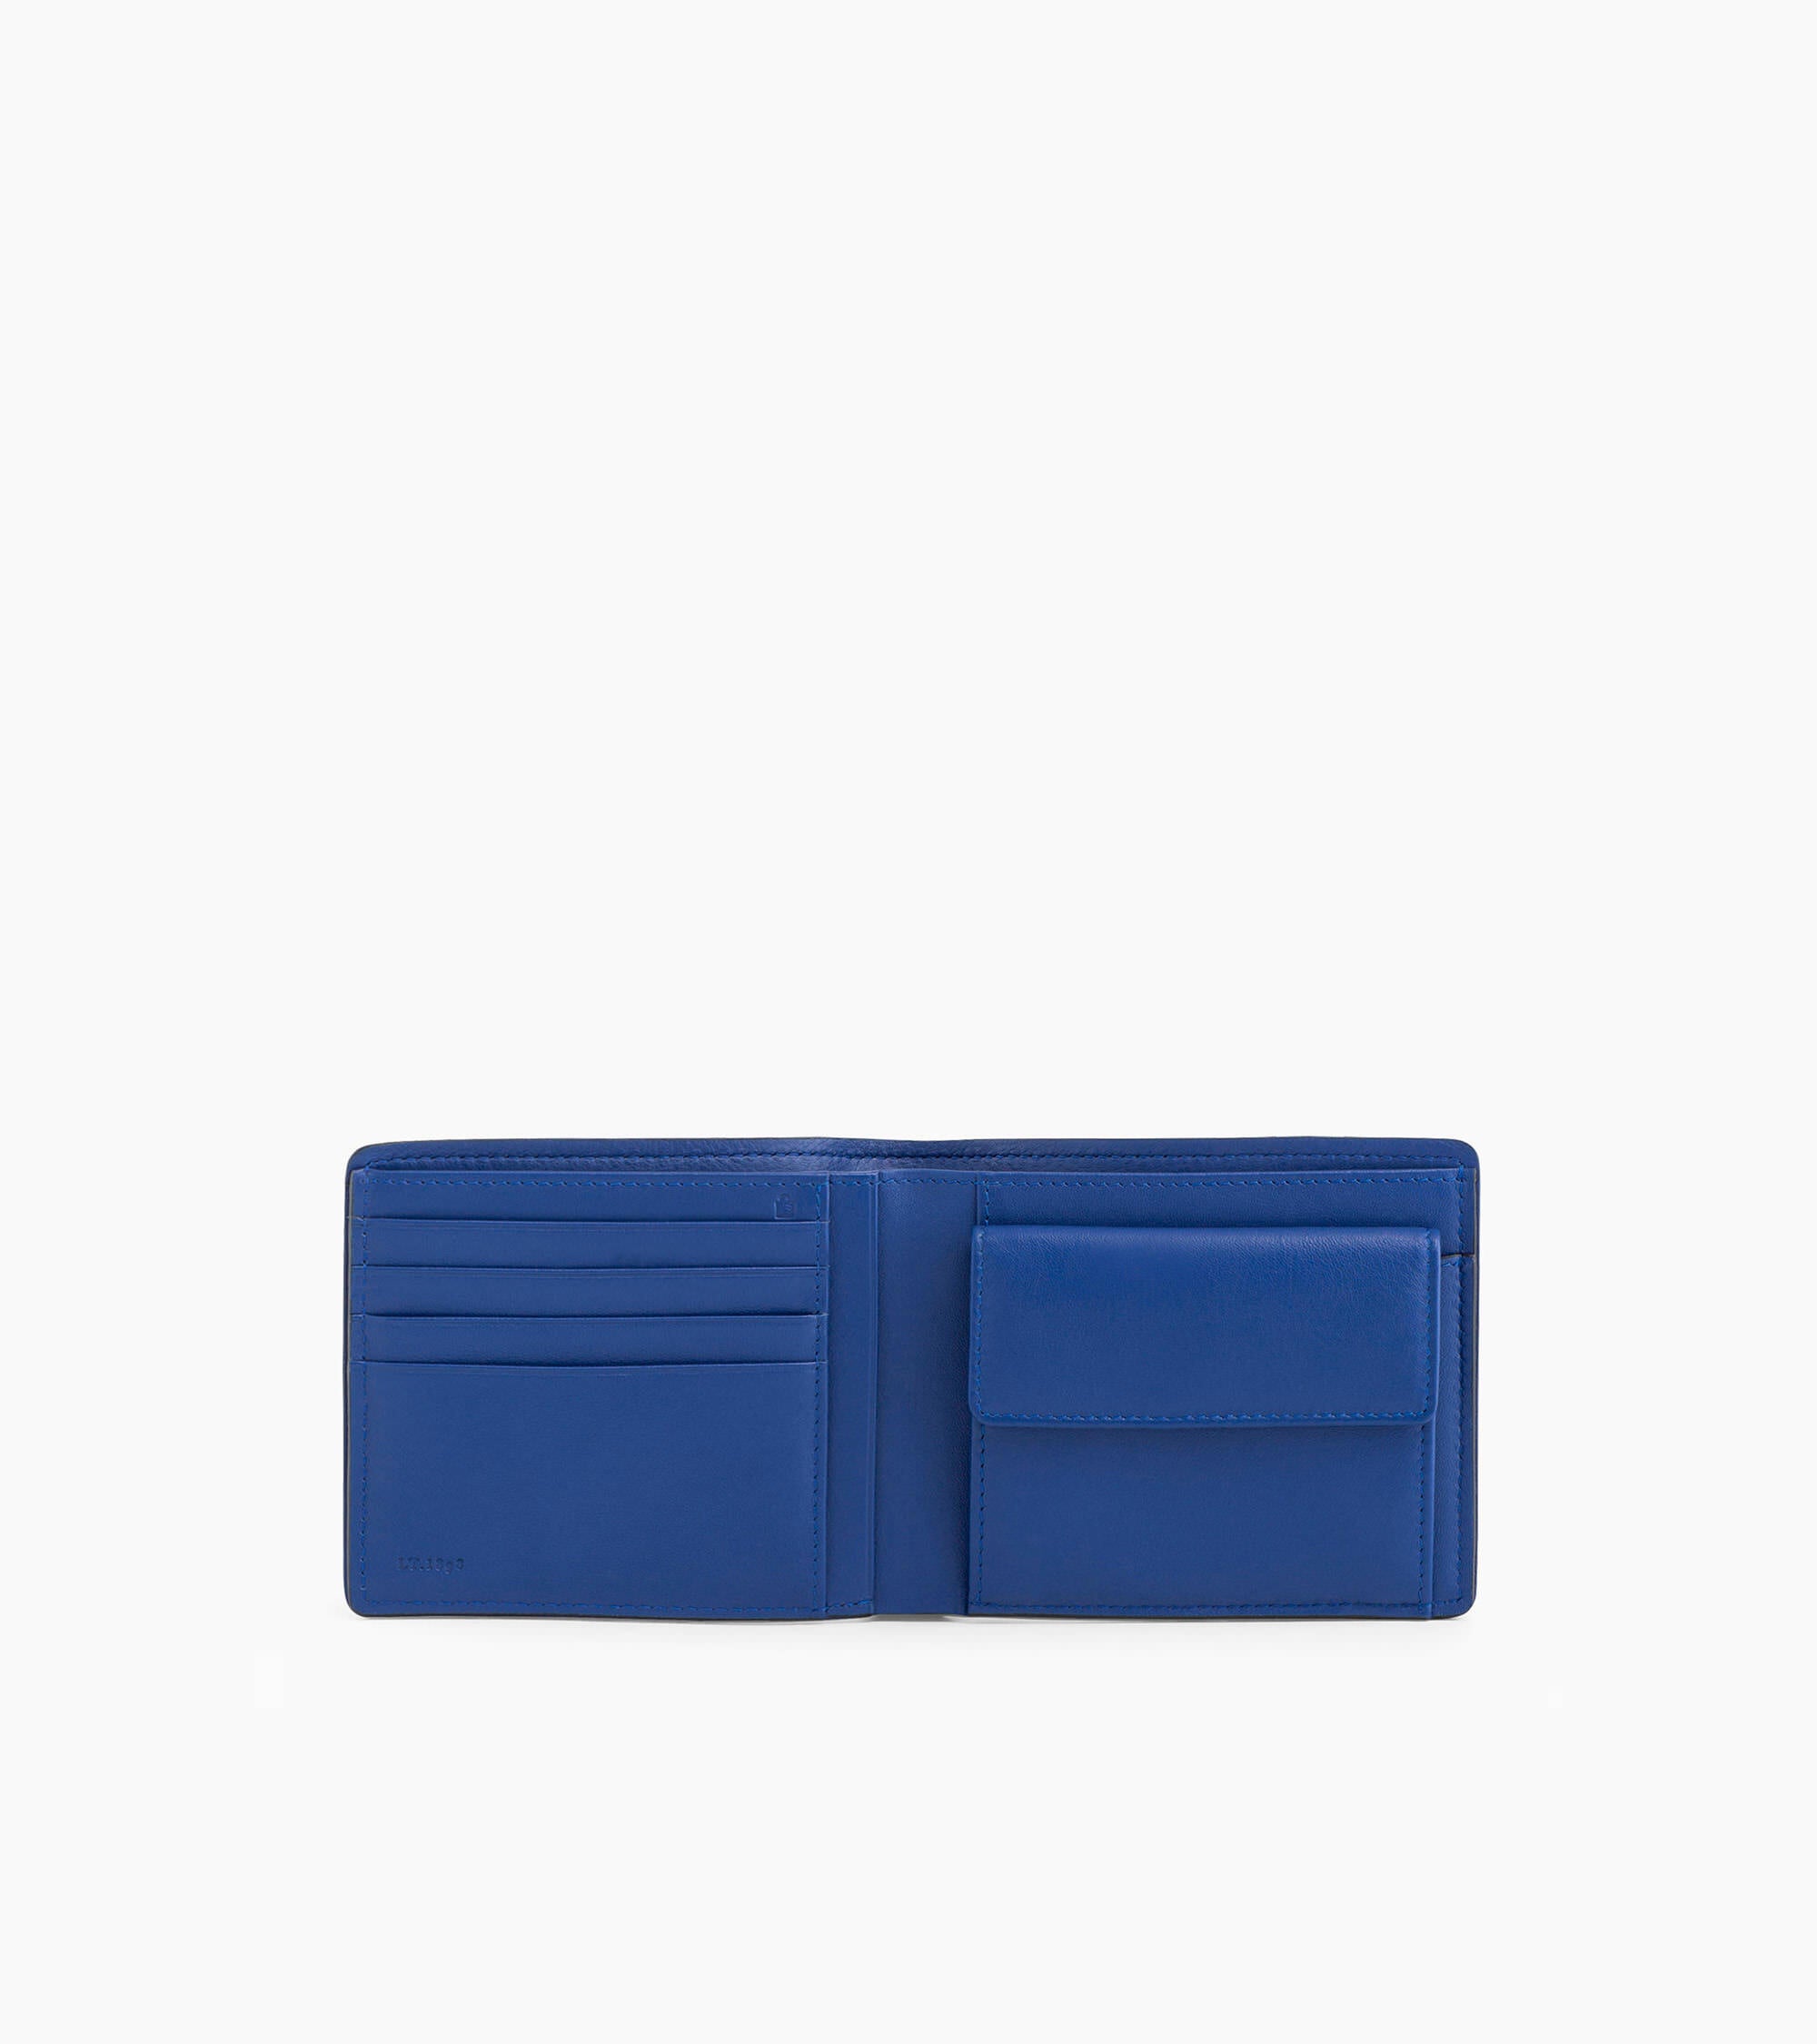 Augustin horizontal flap pocket wallet in grained leather